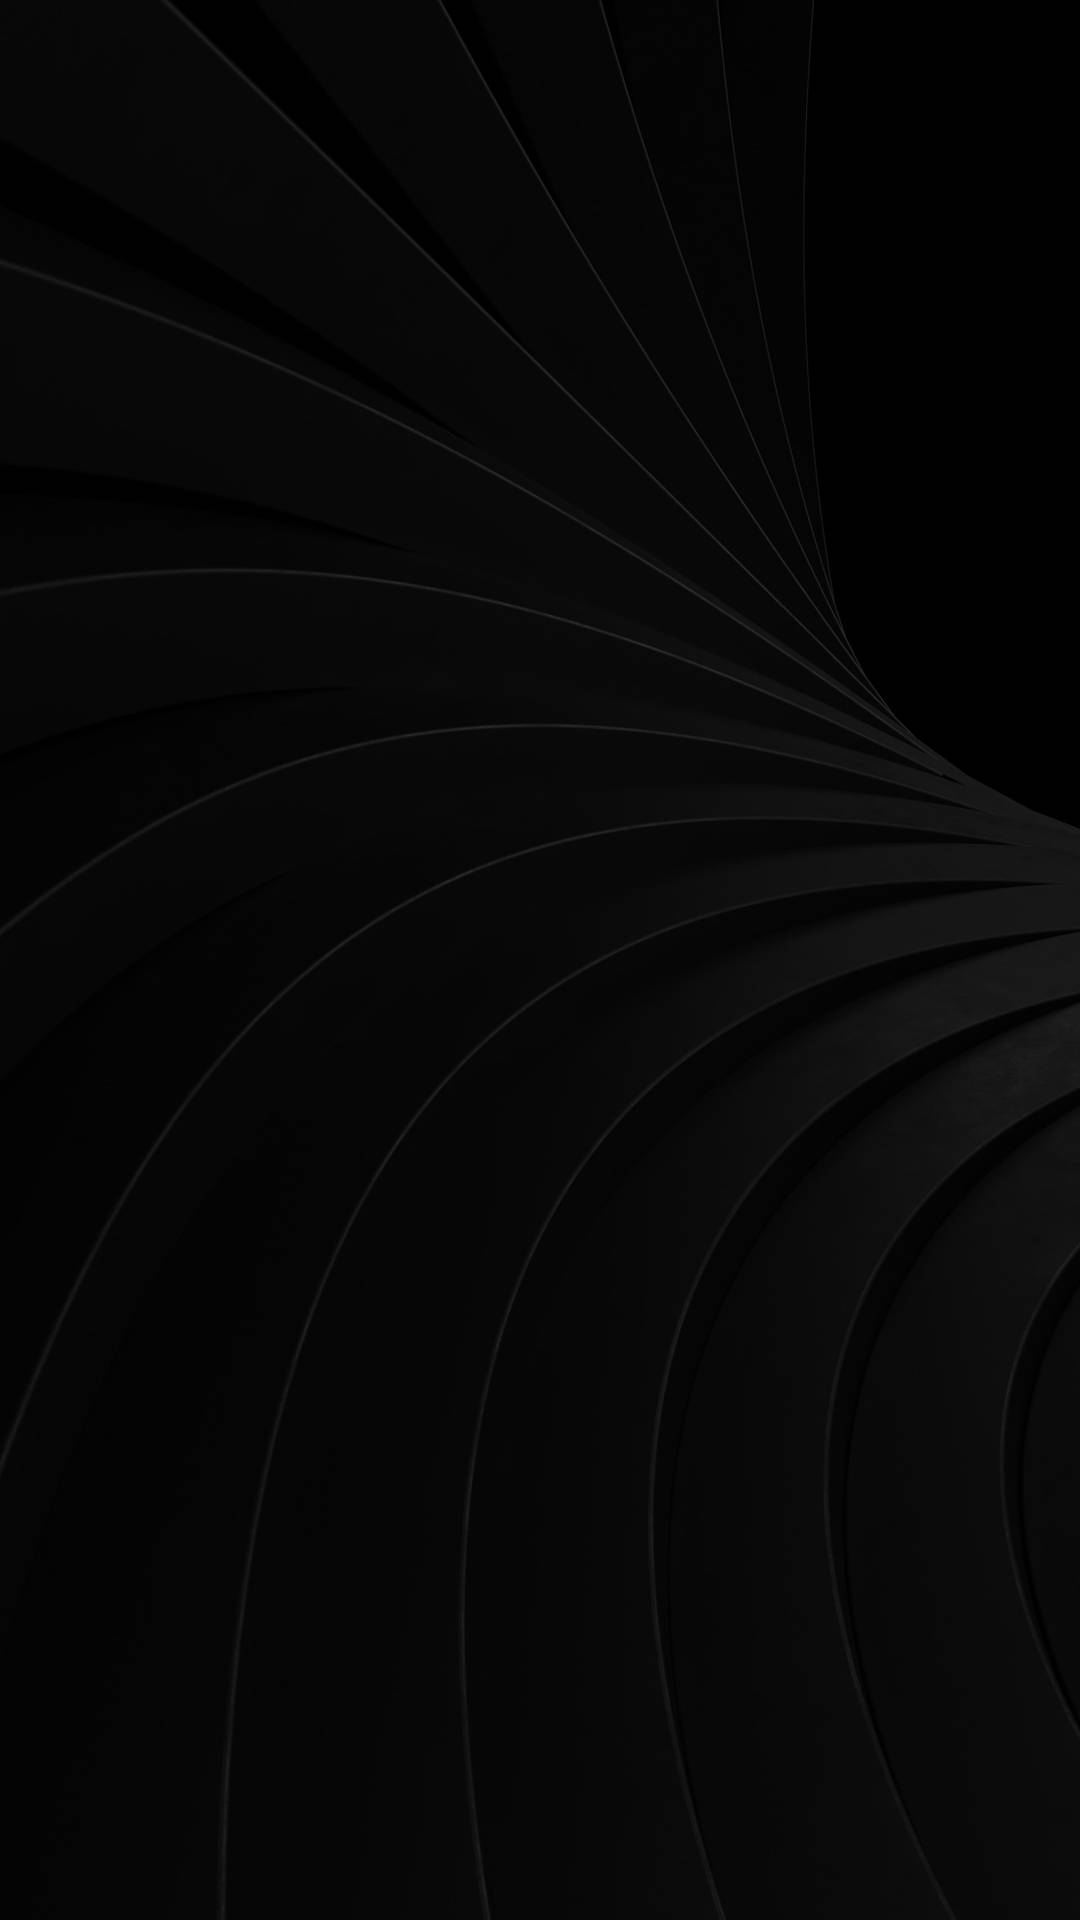 Download Pure Black Hd Phone Screen Curved Abstract Wallpaper | Wallpapers .com